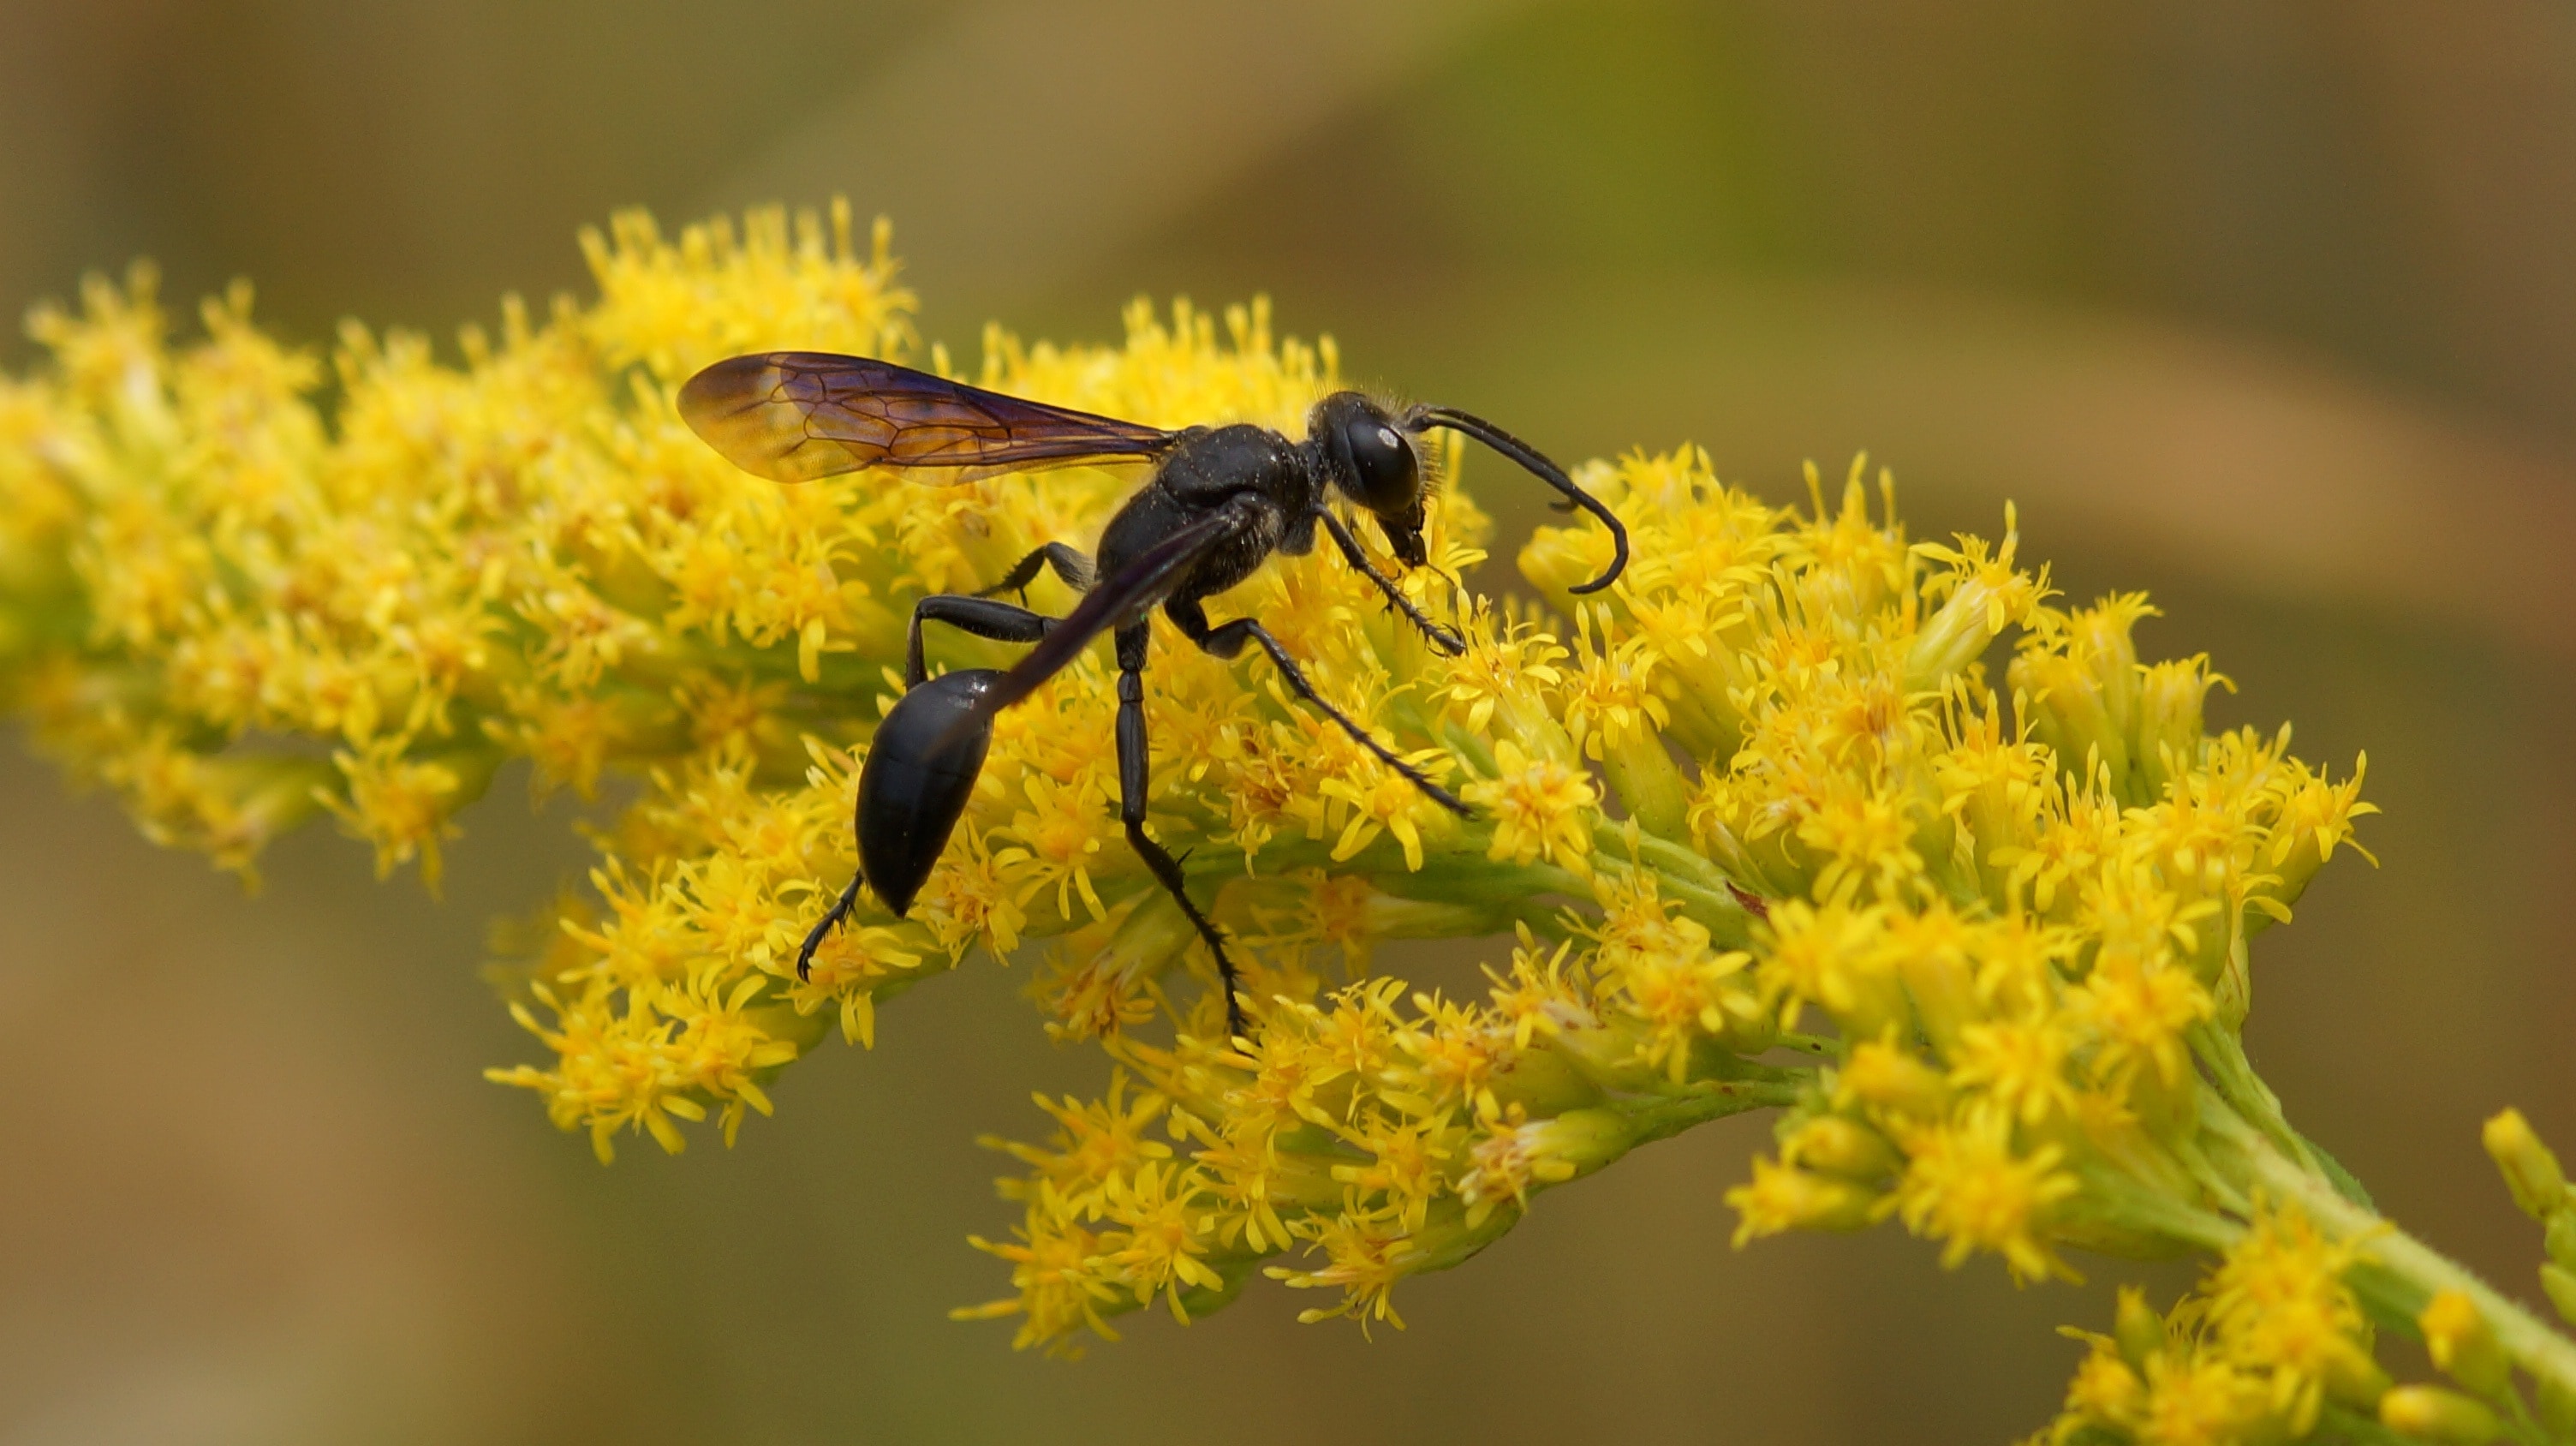 close-up photography of black wasp on yellow petaled flower